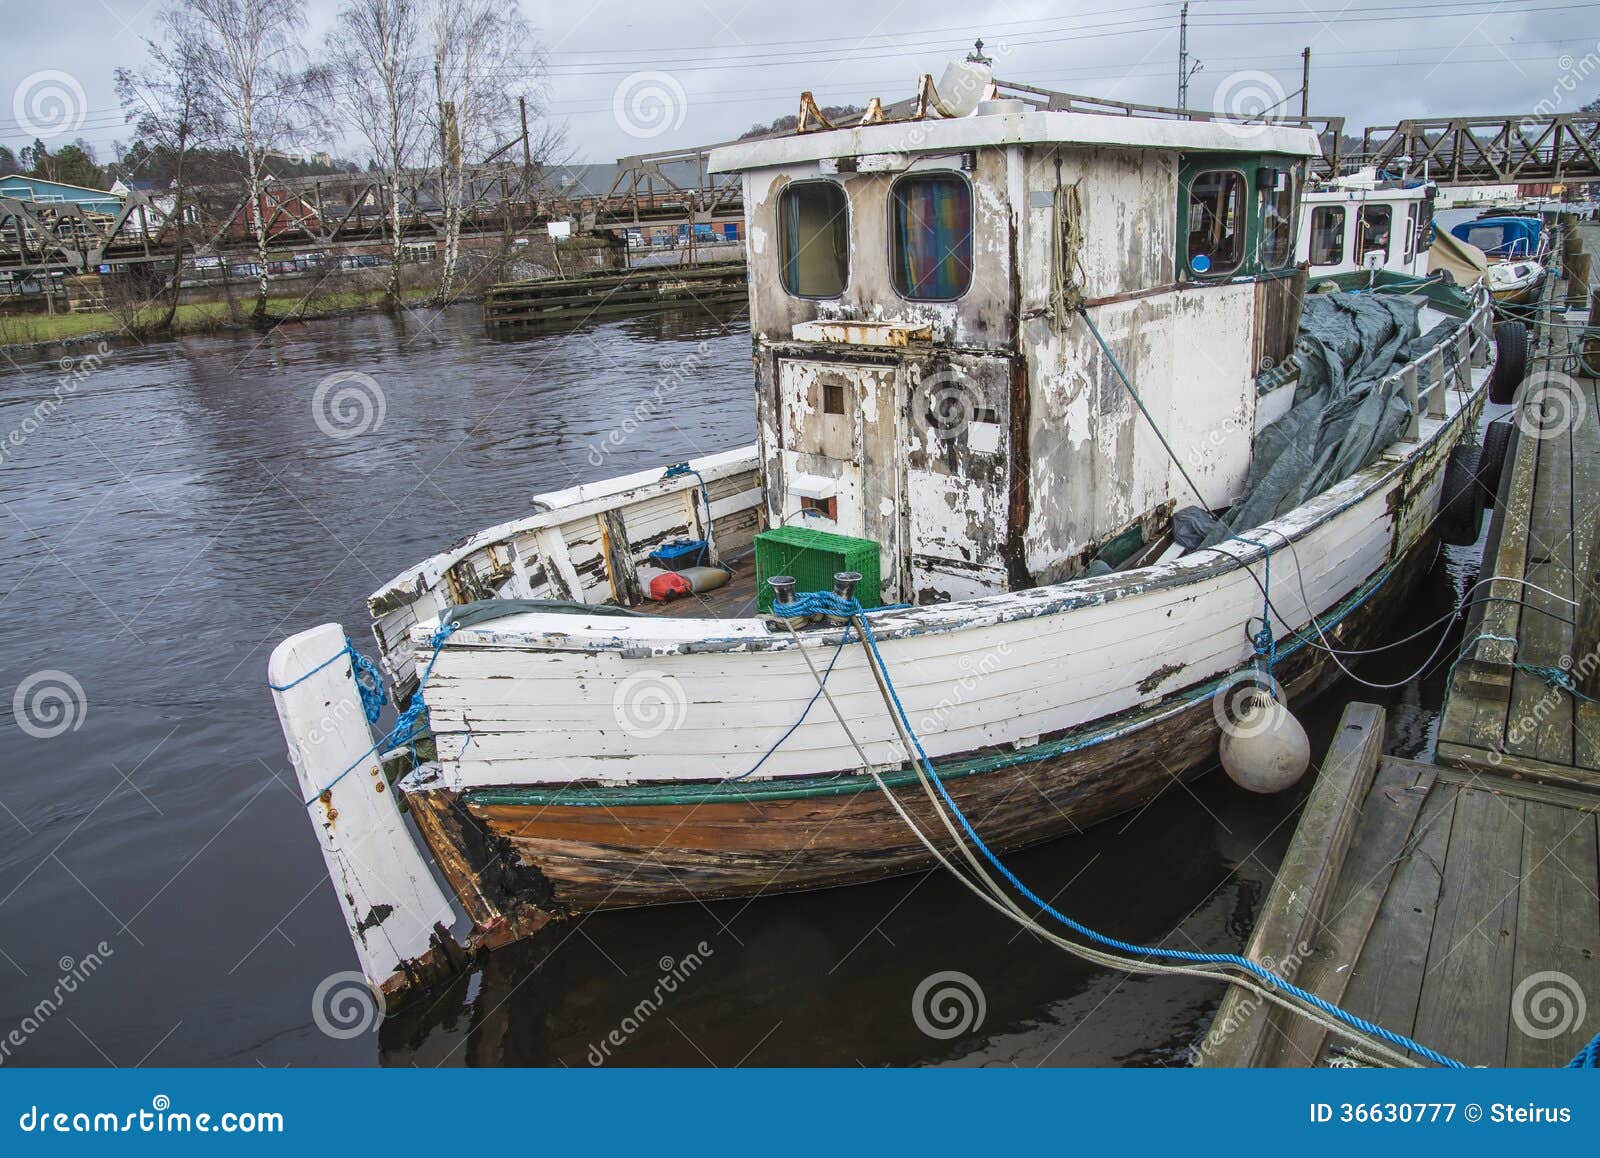 Old Fishing Boat Moored On The River Pier Stock Image 